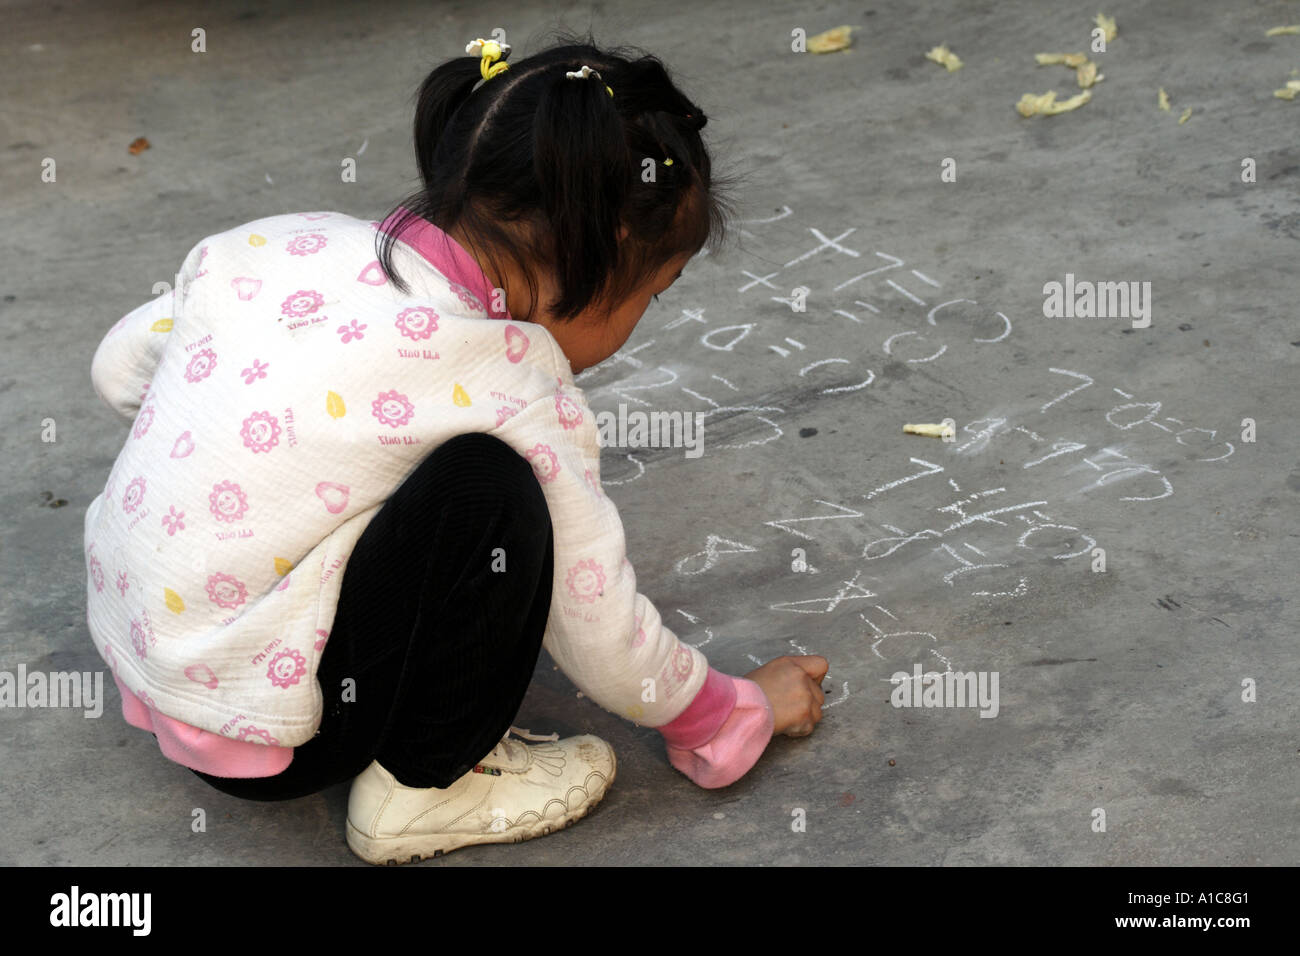 Little girl practices math with chalk on the concrete at the antique market in zhongshan, China Stock Photo